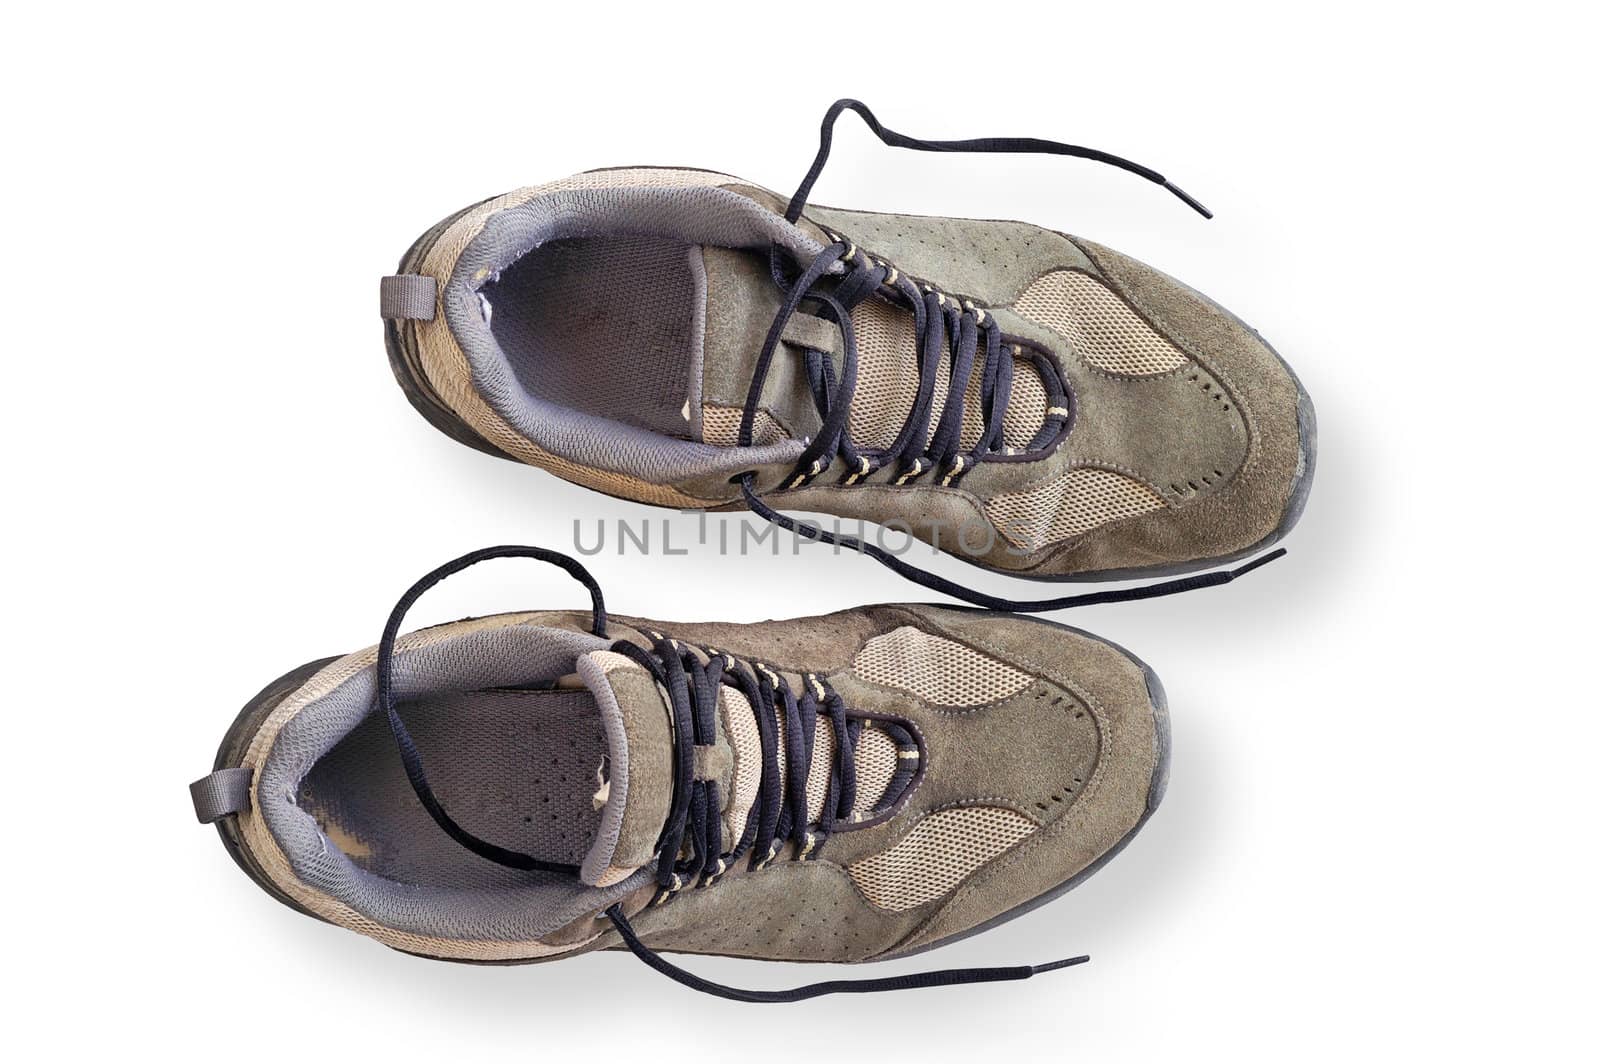 Worn walking shoes with clipping path by Laborer